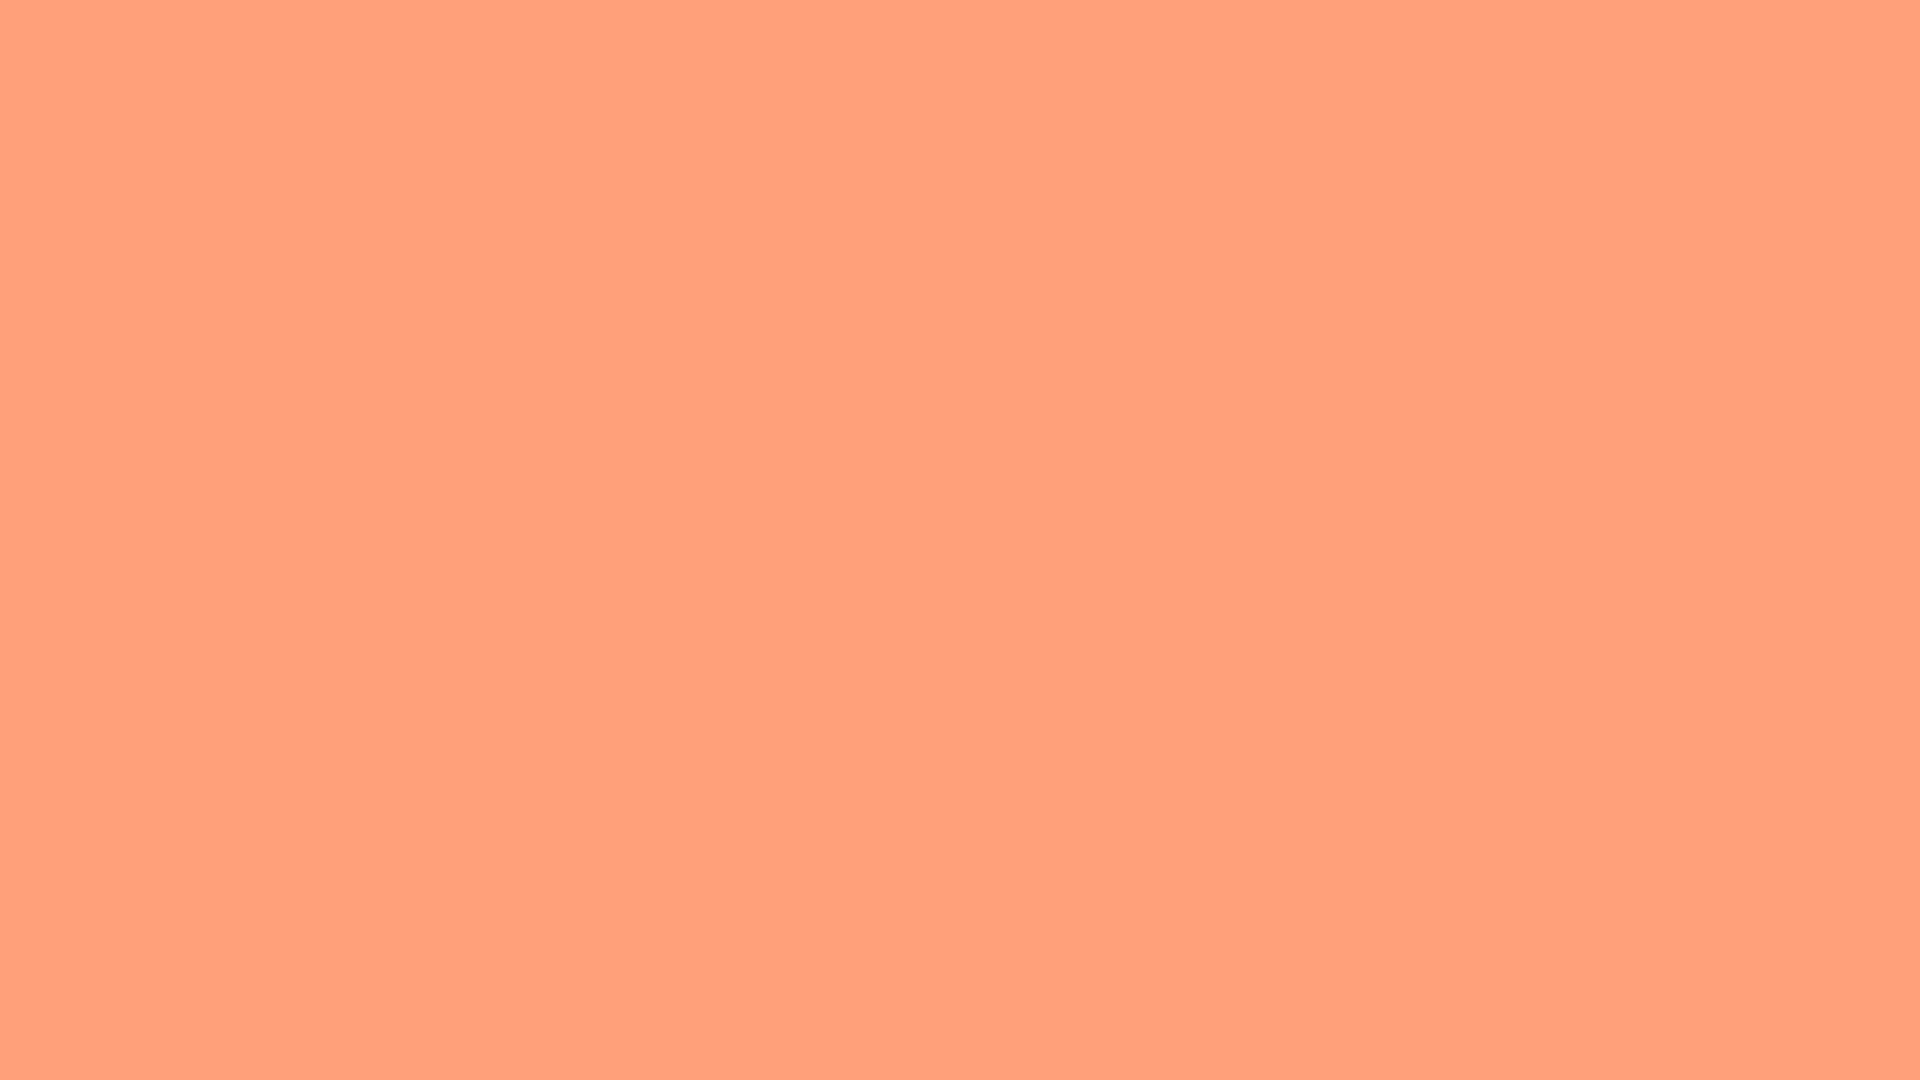 1920x1080 Light Salmon Solid Color Background